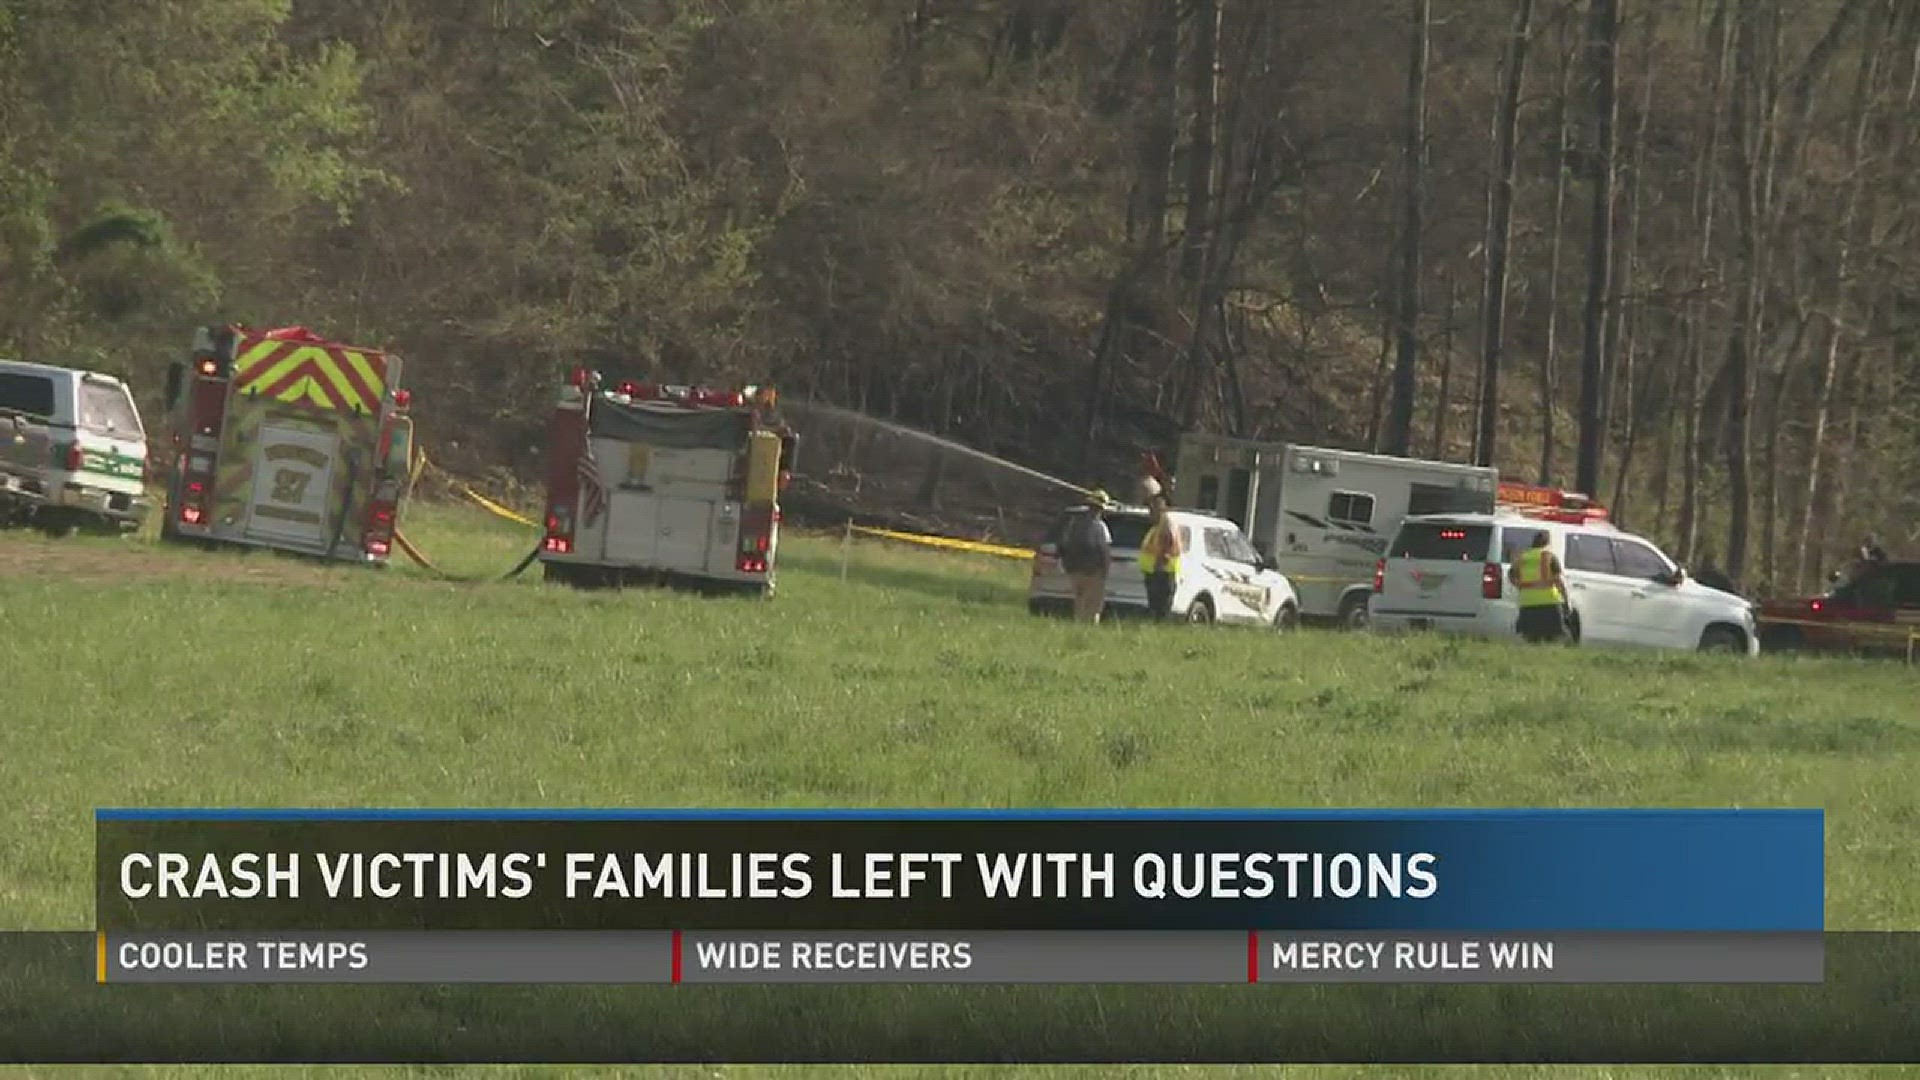 April 4, 2017: One year after a fatal helicopter crash in Pigeon Forge, the families of the five victims are still looking for answers as to what caused the chopper to go down.